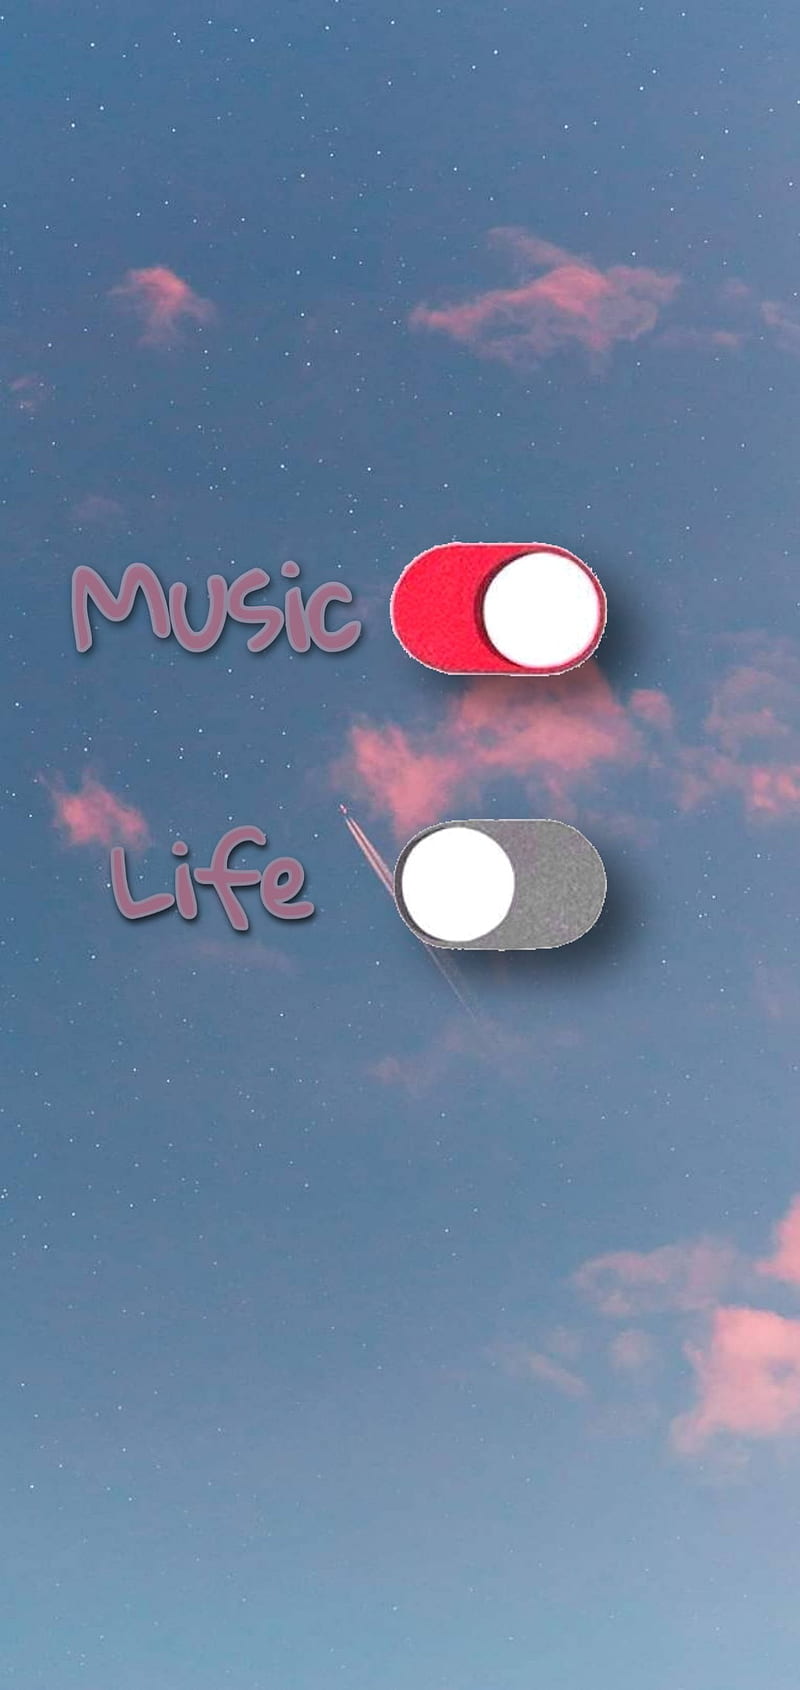 Music ON life OFF, aesthetic, top, HD phone wallpaper